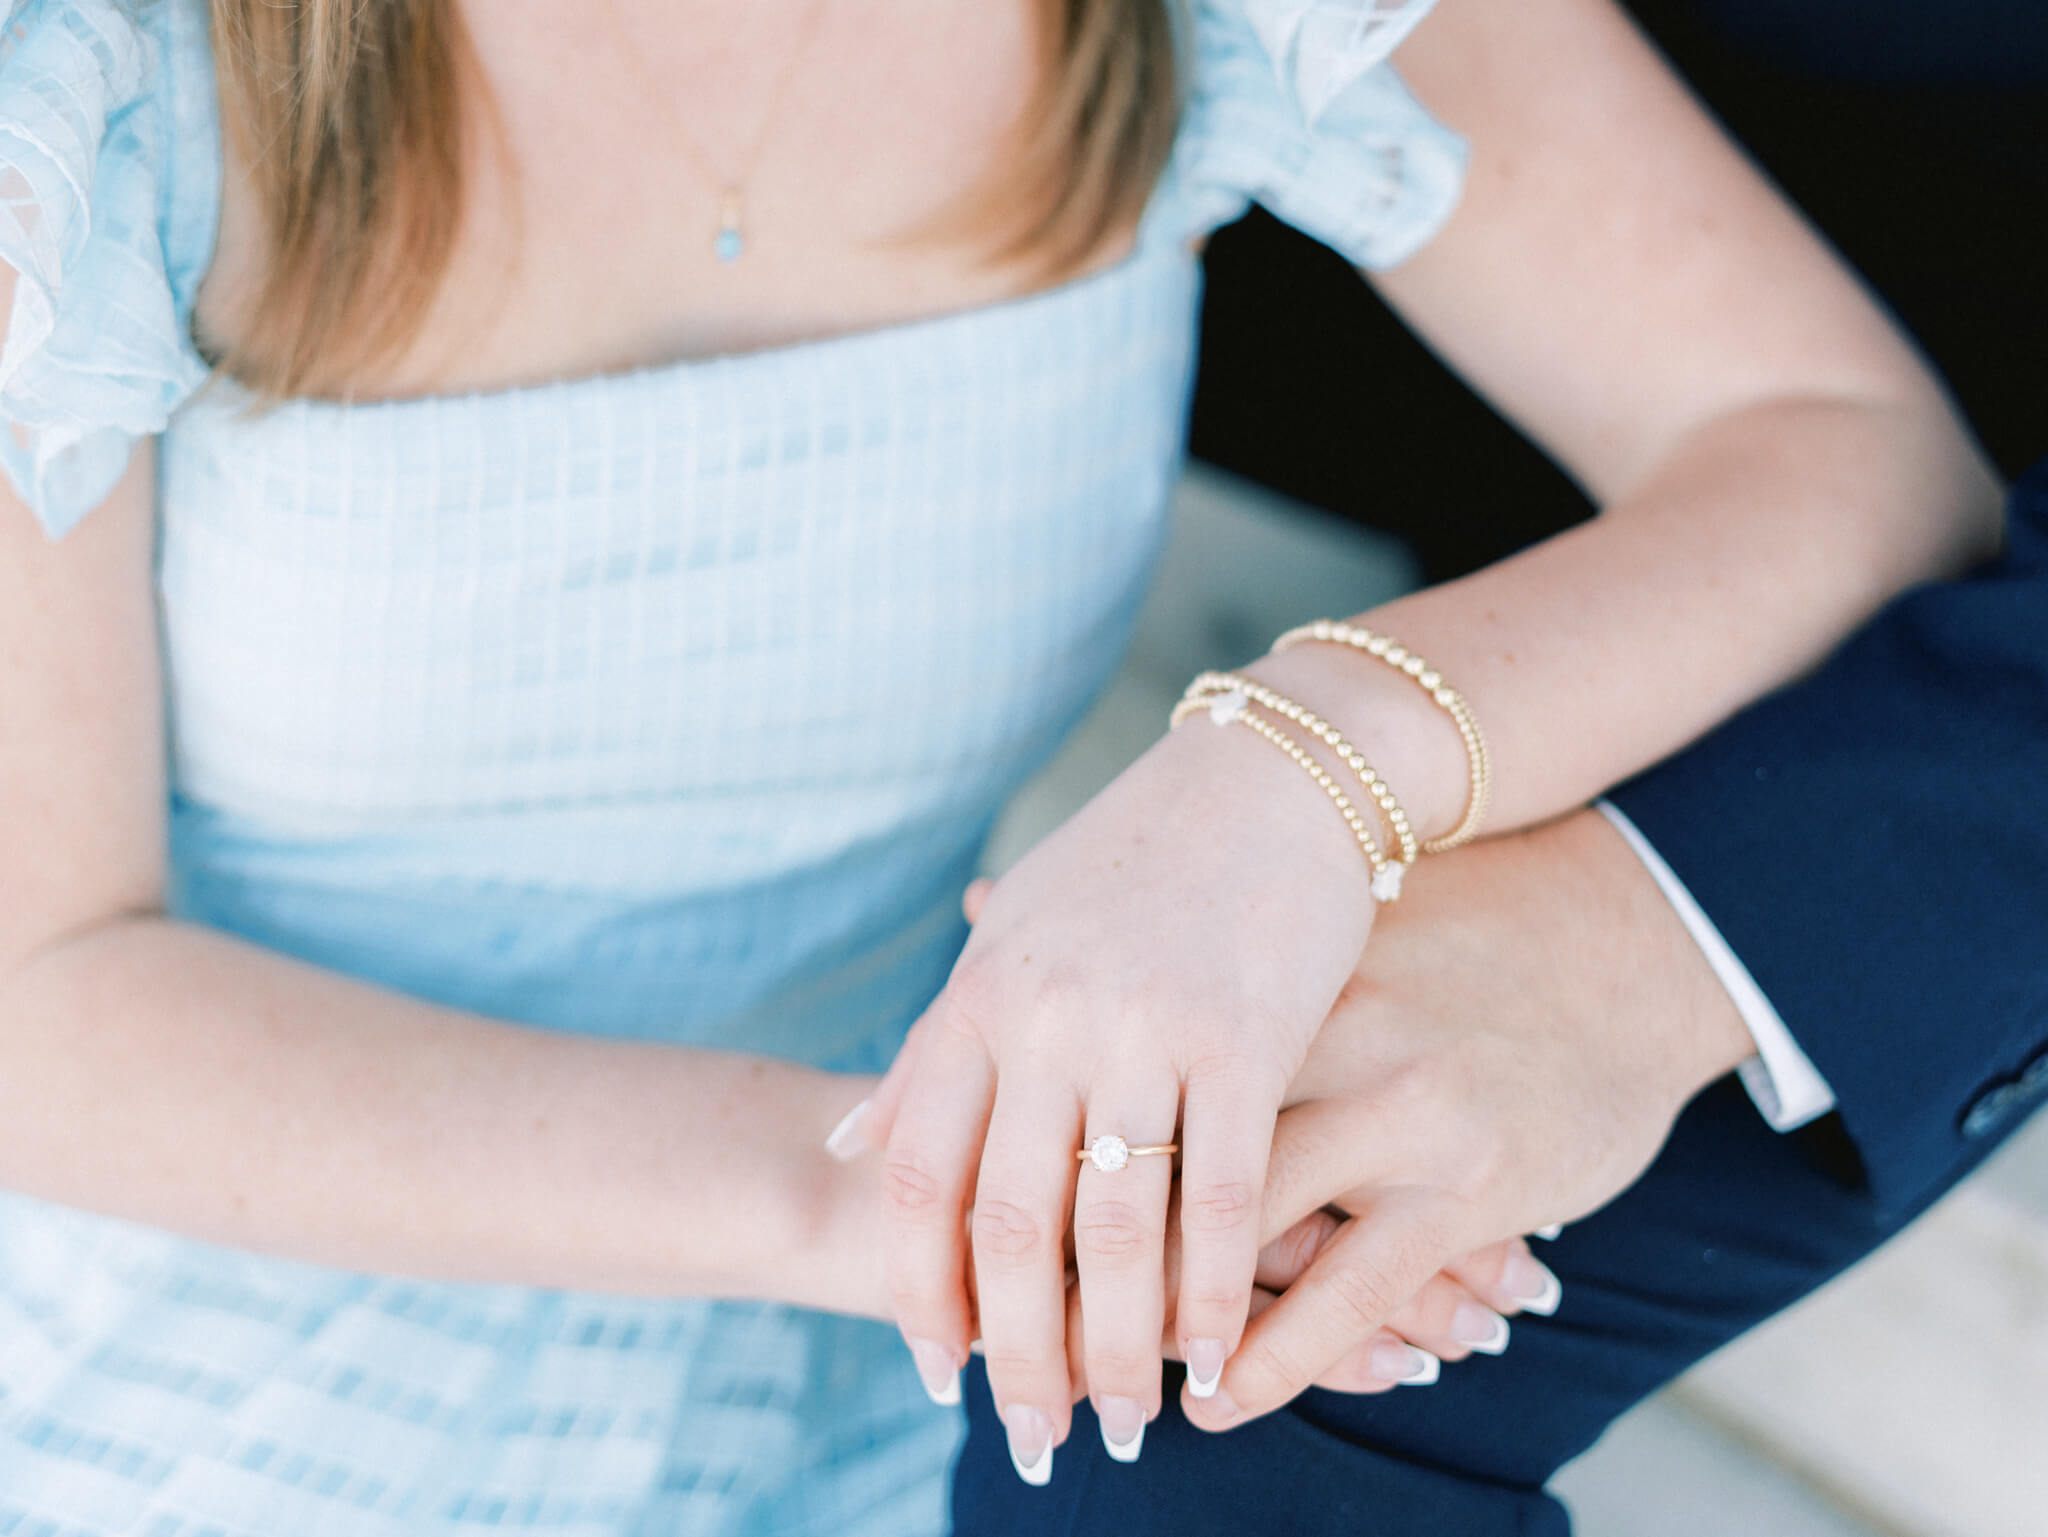 Close up of a woman's hands over a man's hands showing off her gold and diamond engagement ring.